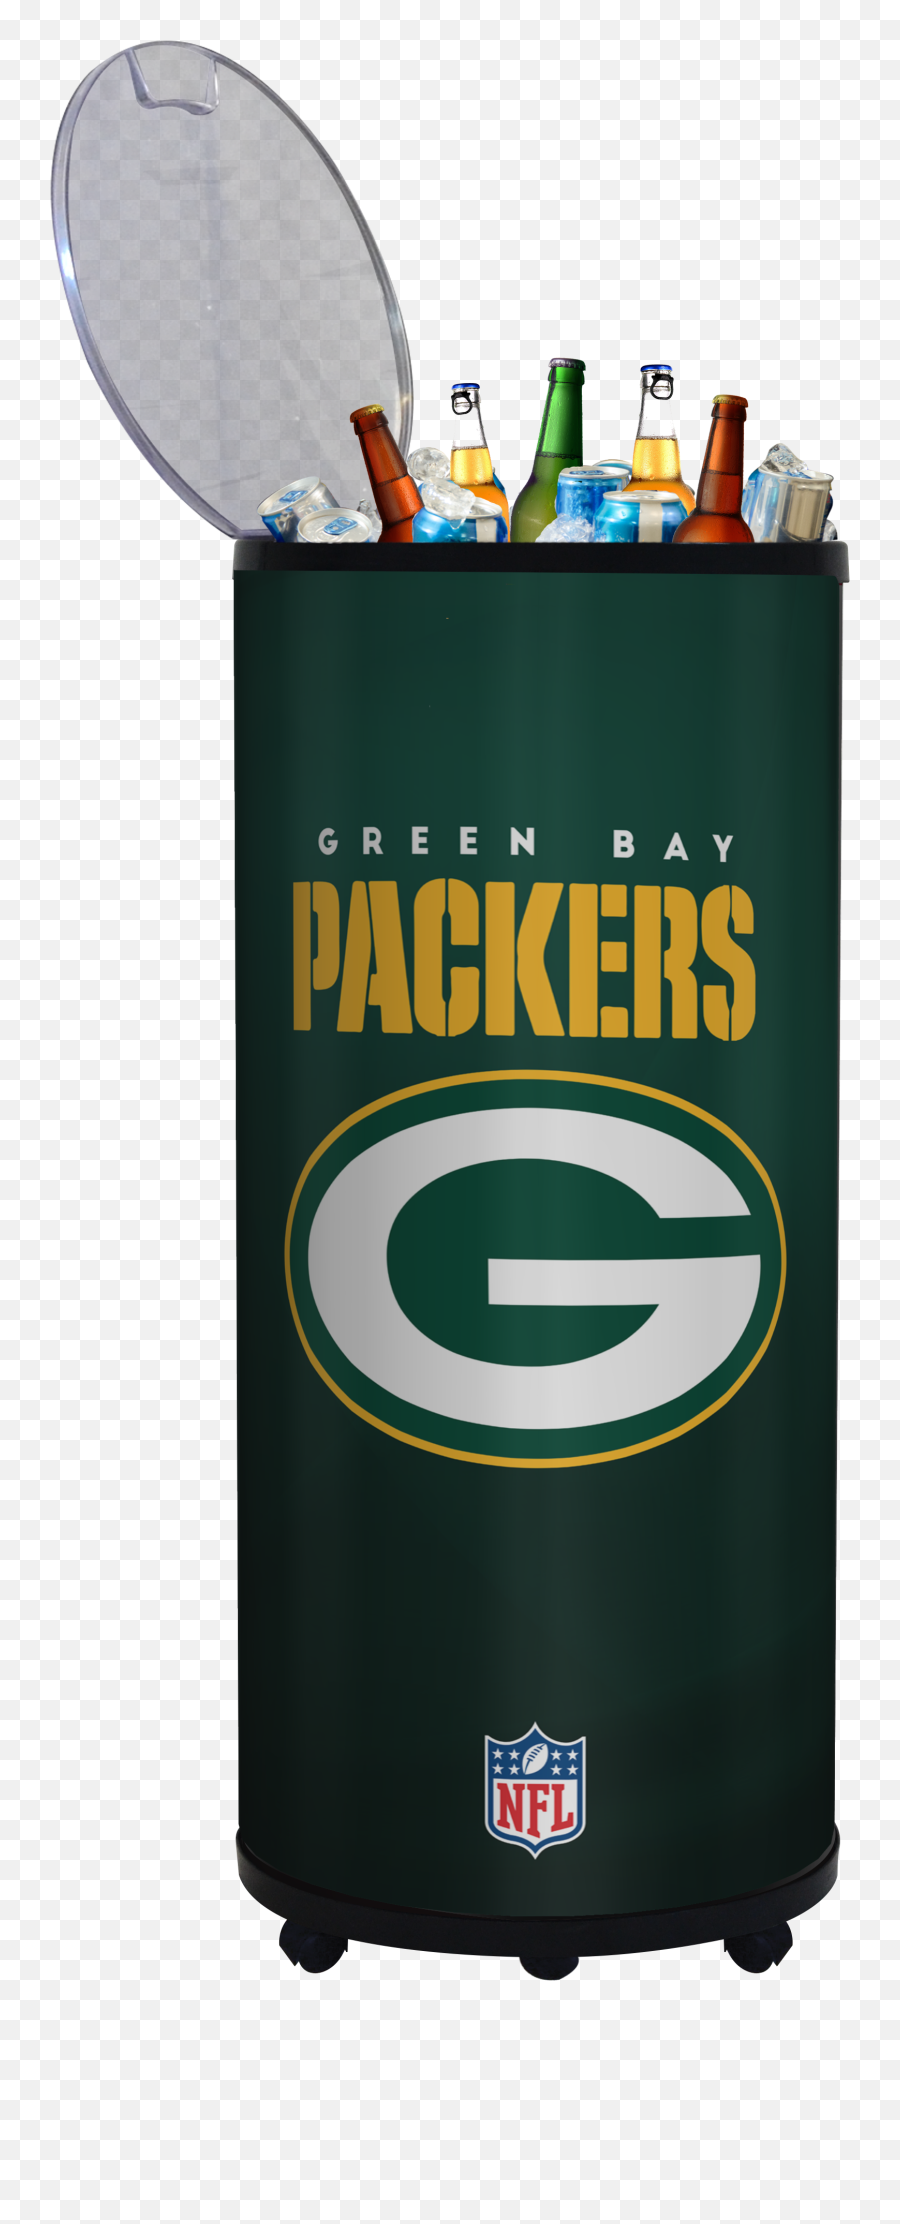 Download Green Bay Packers Fans Nfl Football - Poster Green Bay Packers Png,Green Bay Packers Png